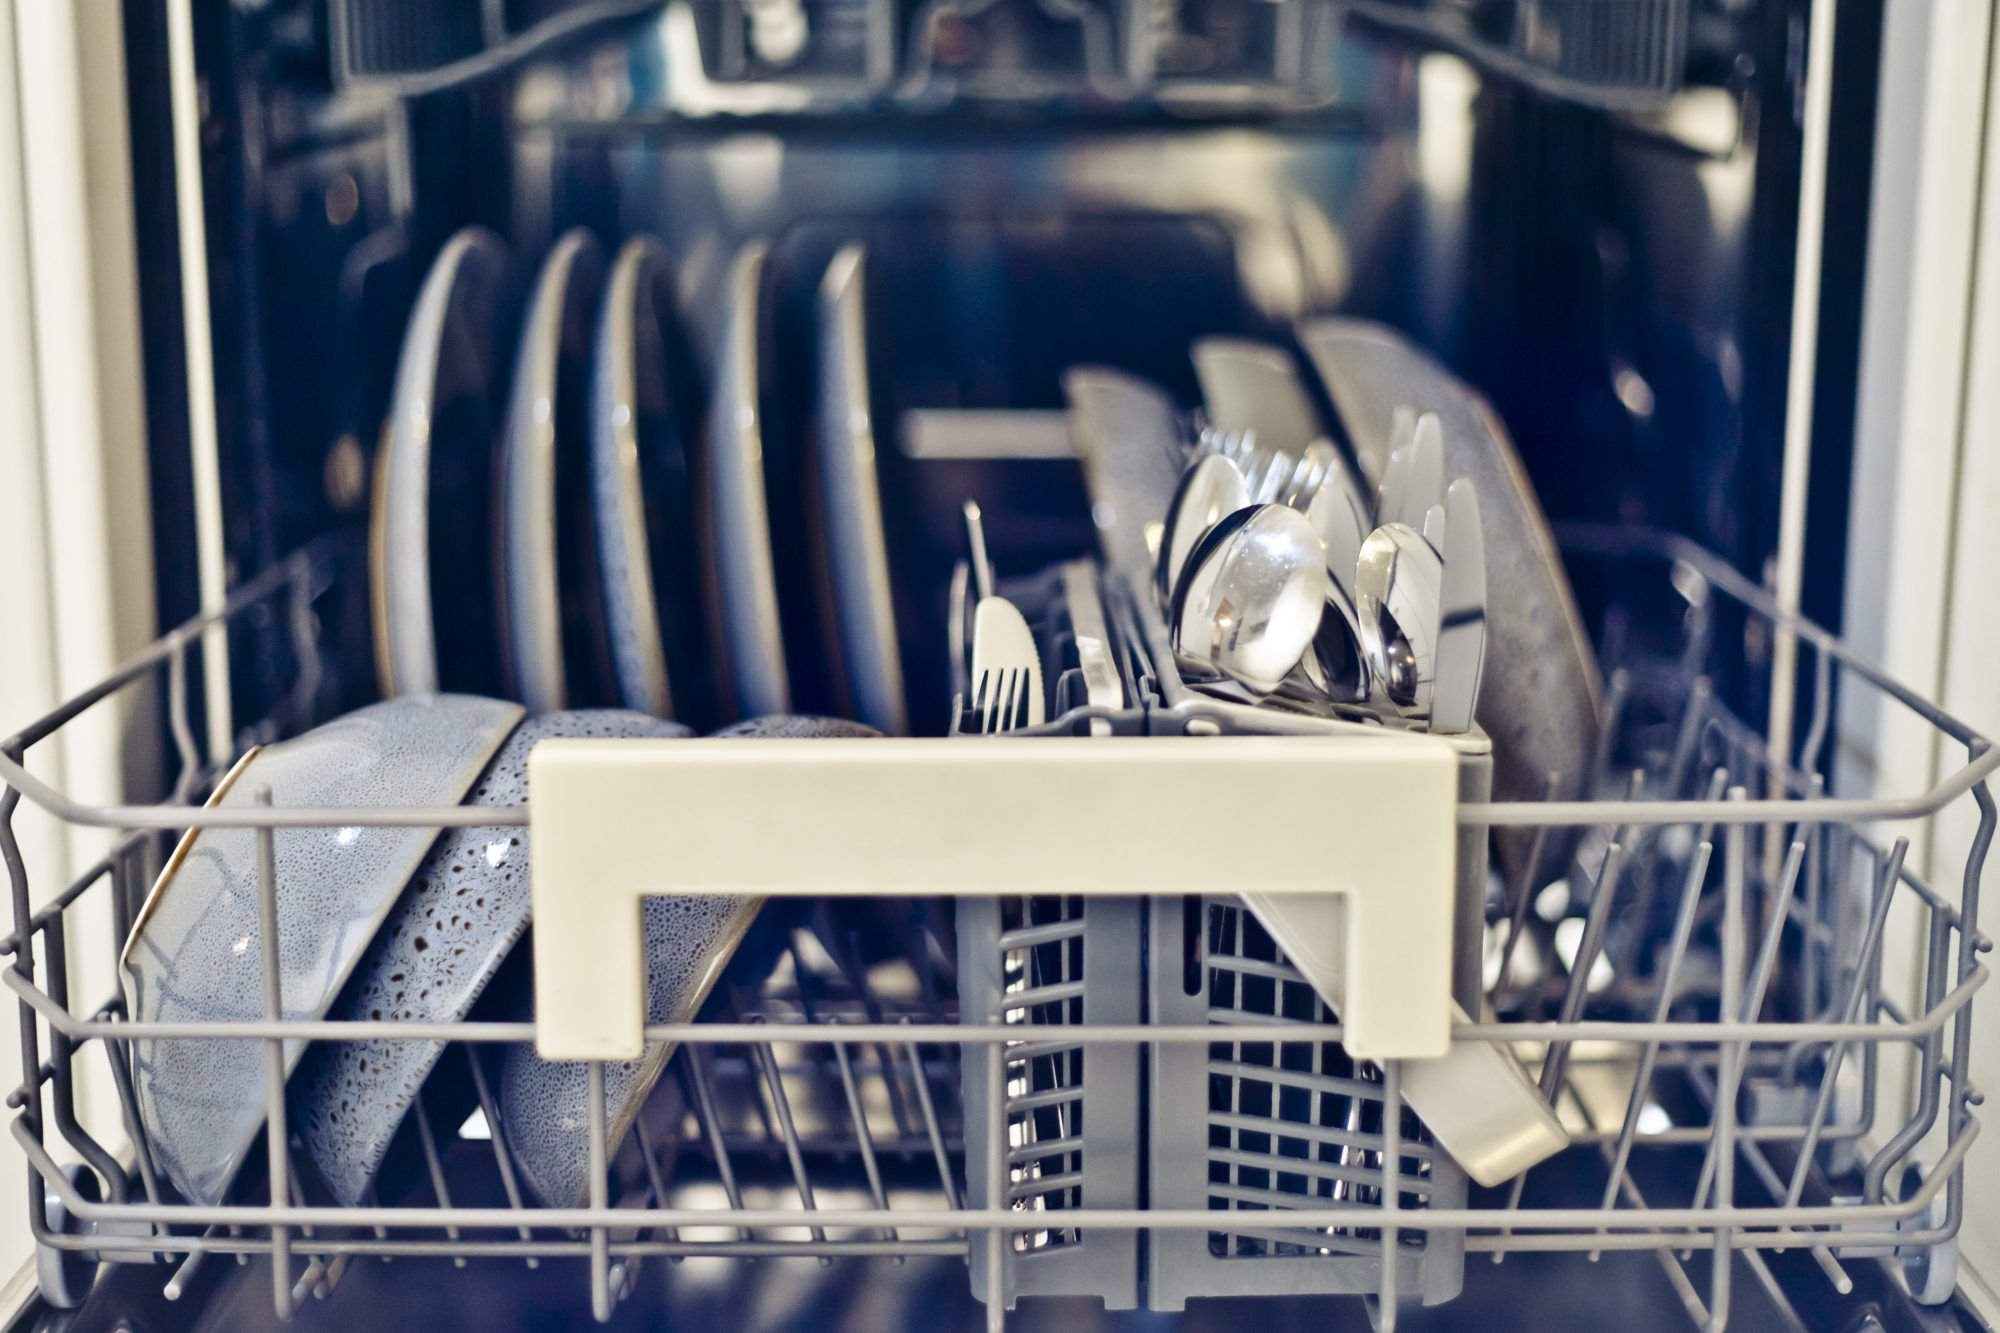 10 Things You May Not Realize Your Dishwasher Can Do